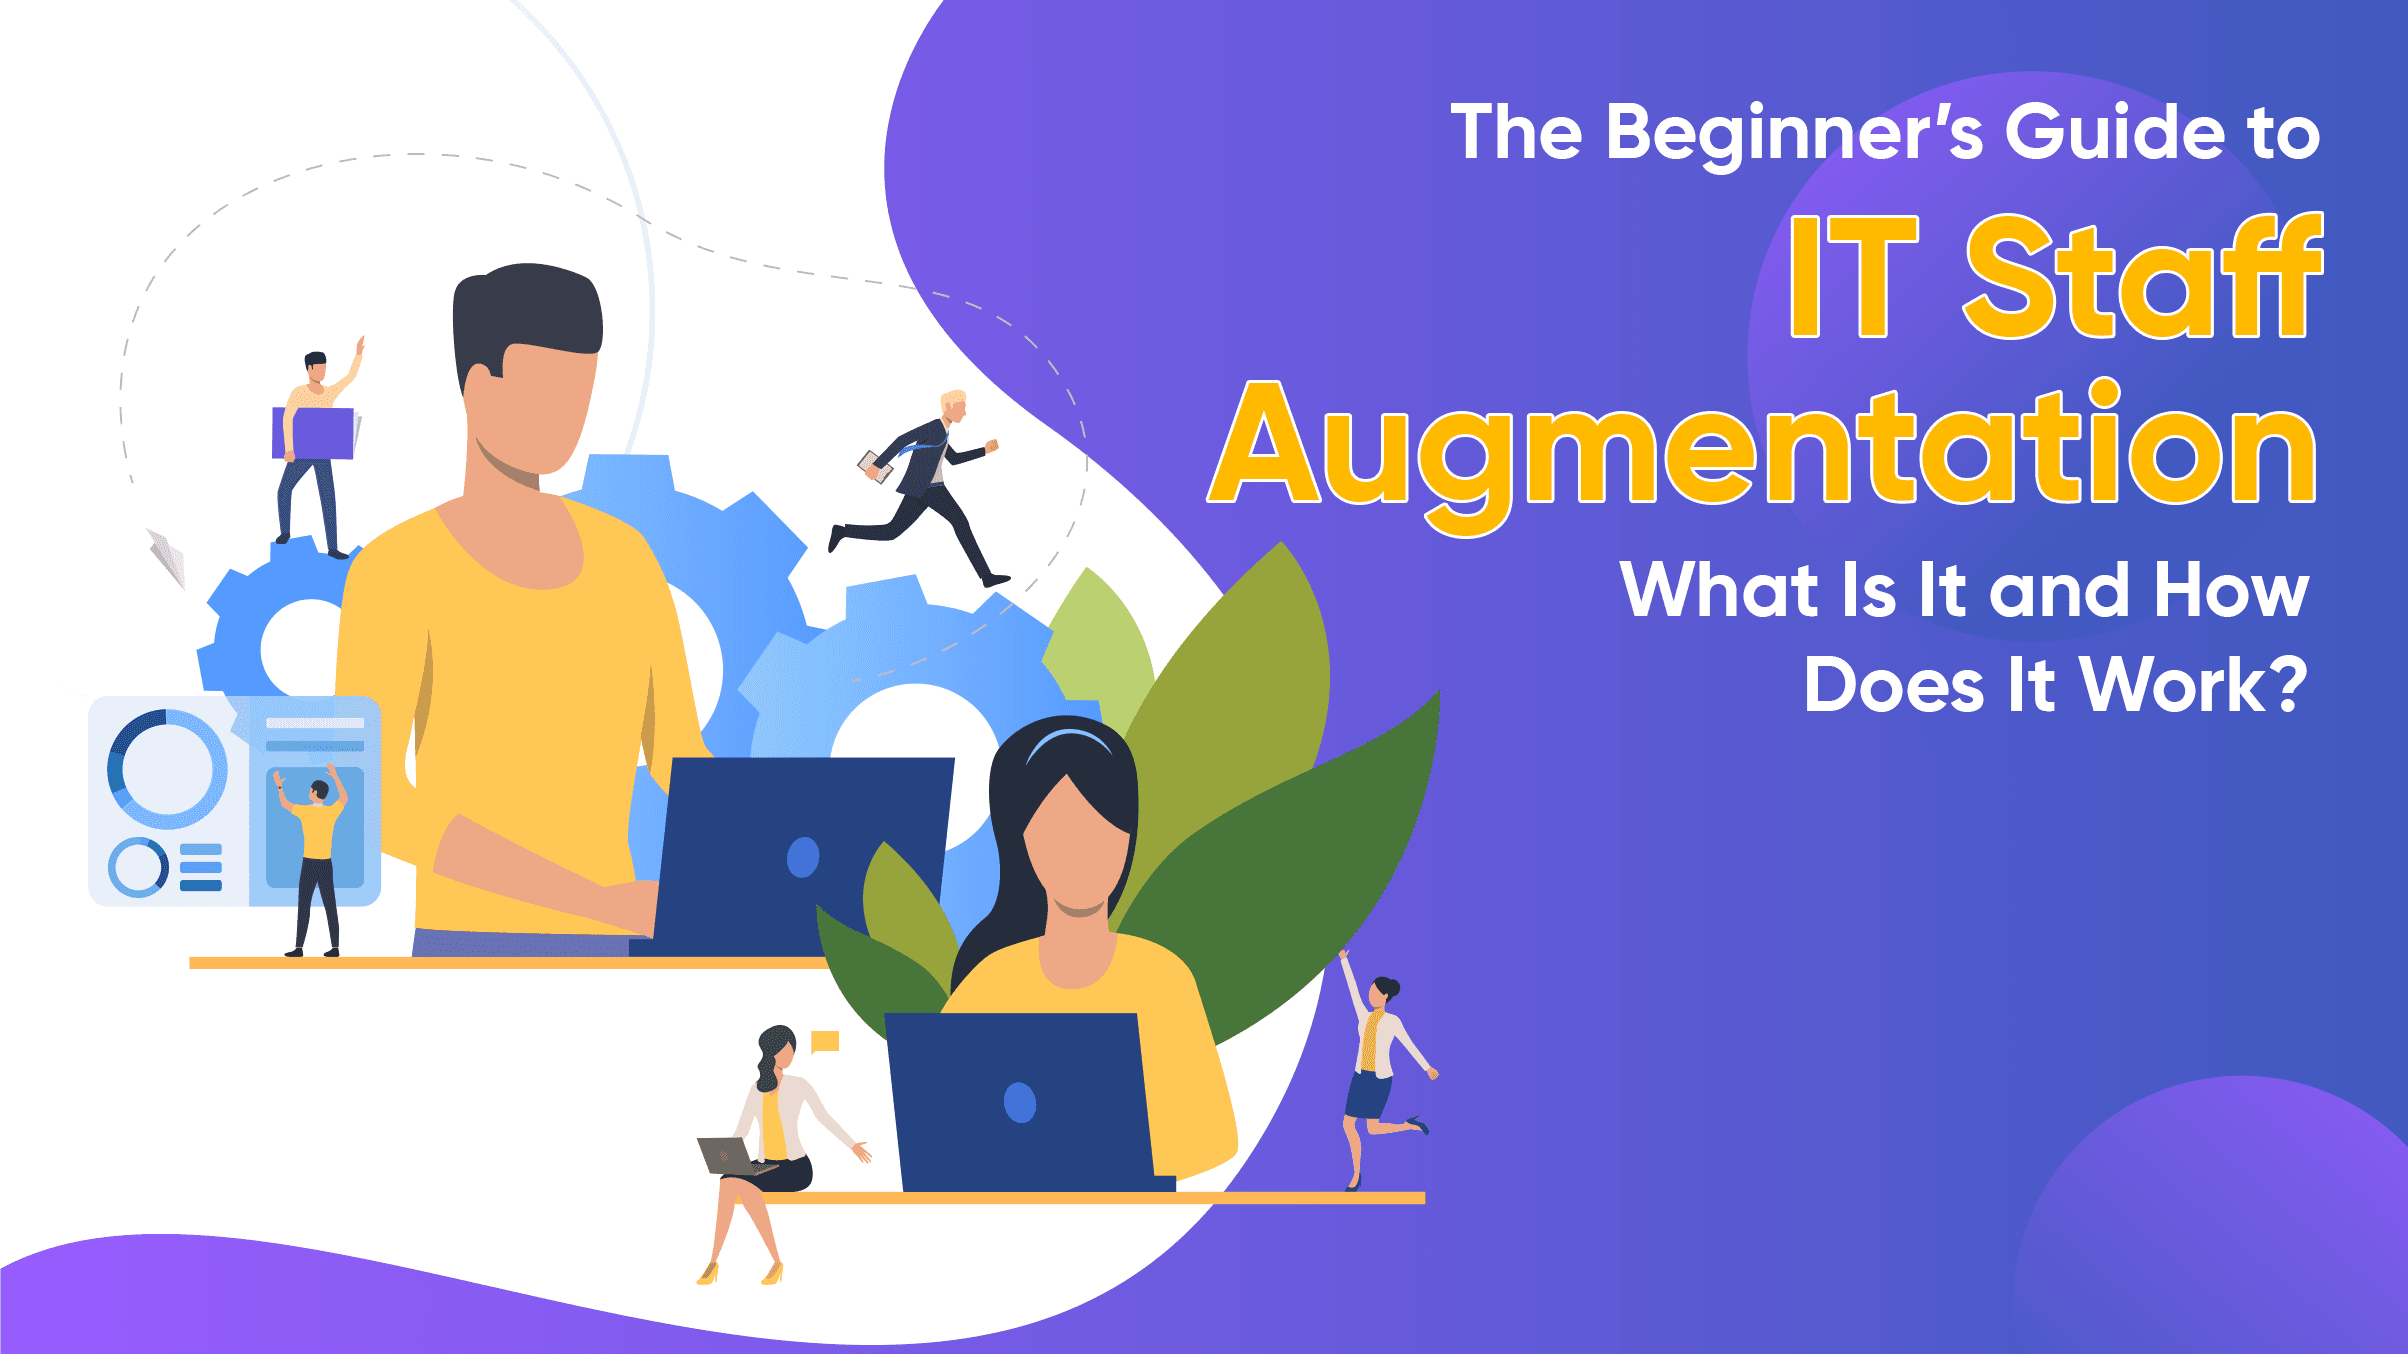 The Beginner’s Guide to IT Staff Augmentation, What Is It and How Does It Work?